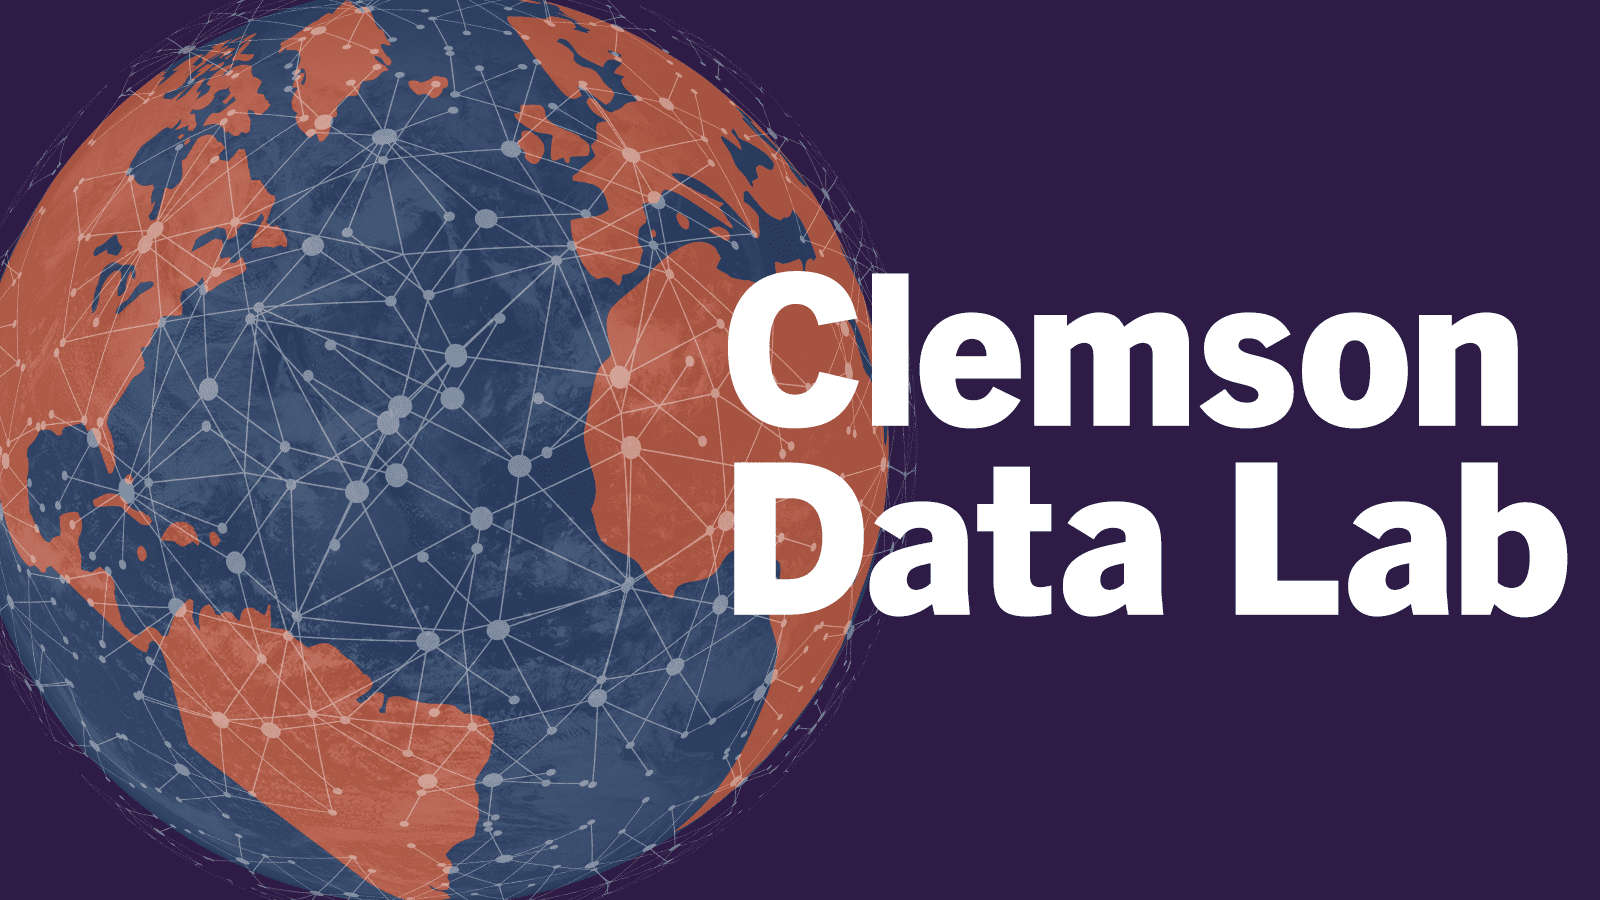 A graphic showing a globe and "Clemson Data Lab"